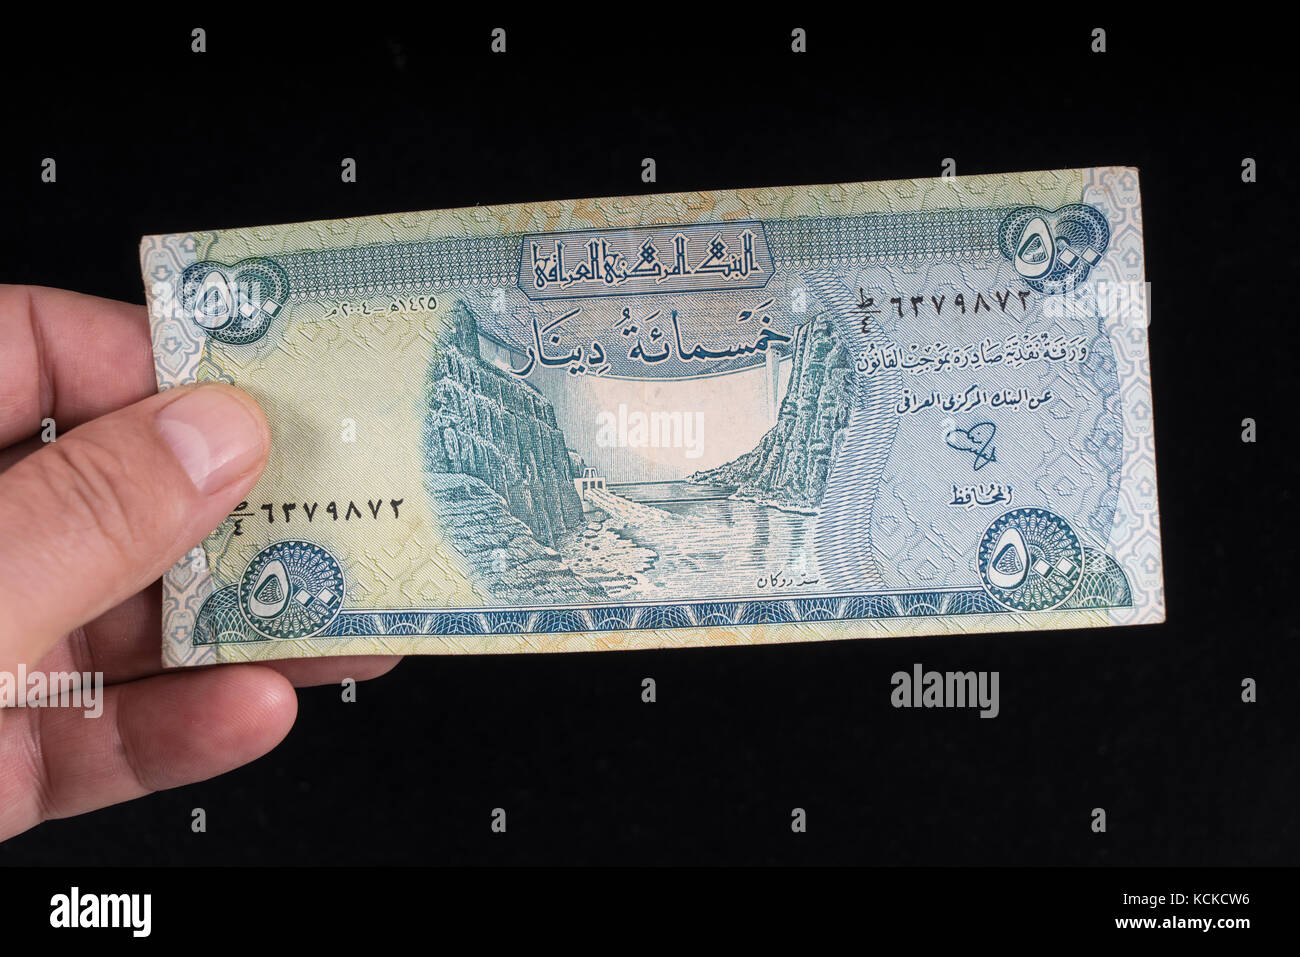 An old Iraqi banknote on hand Stock Photo